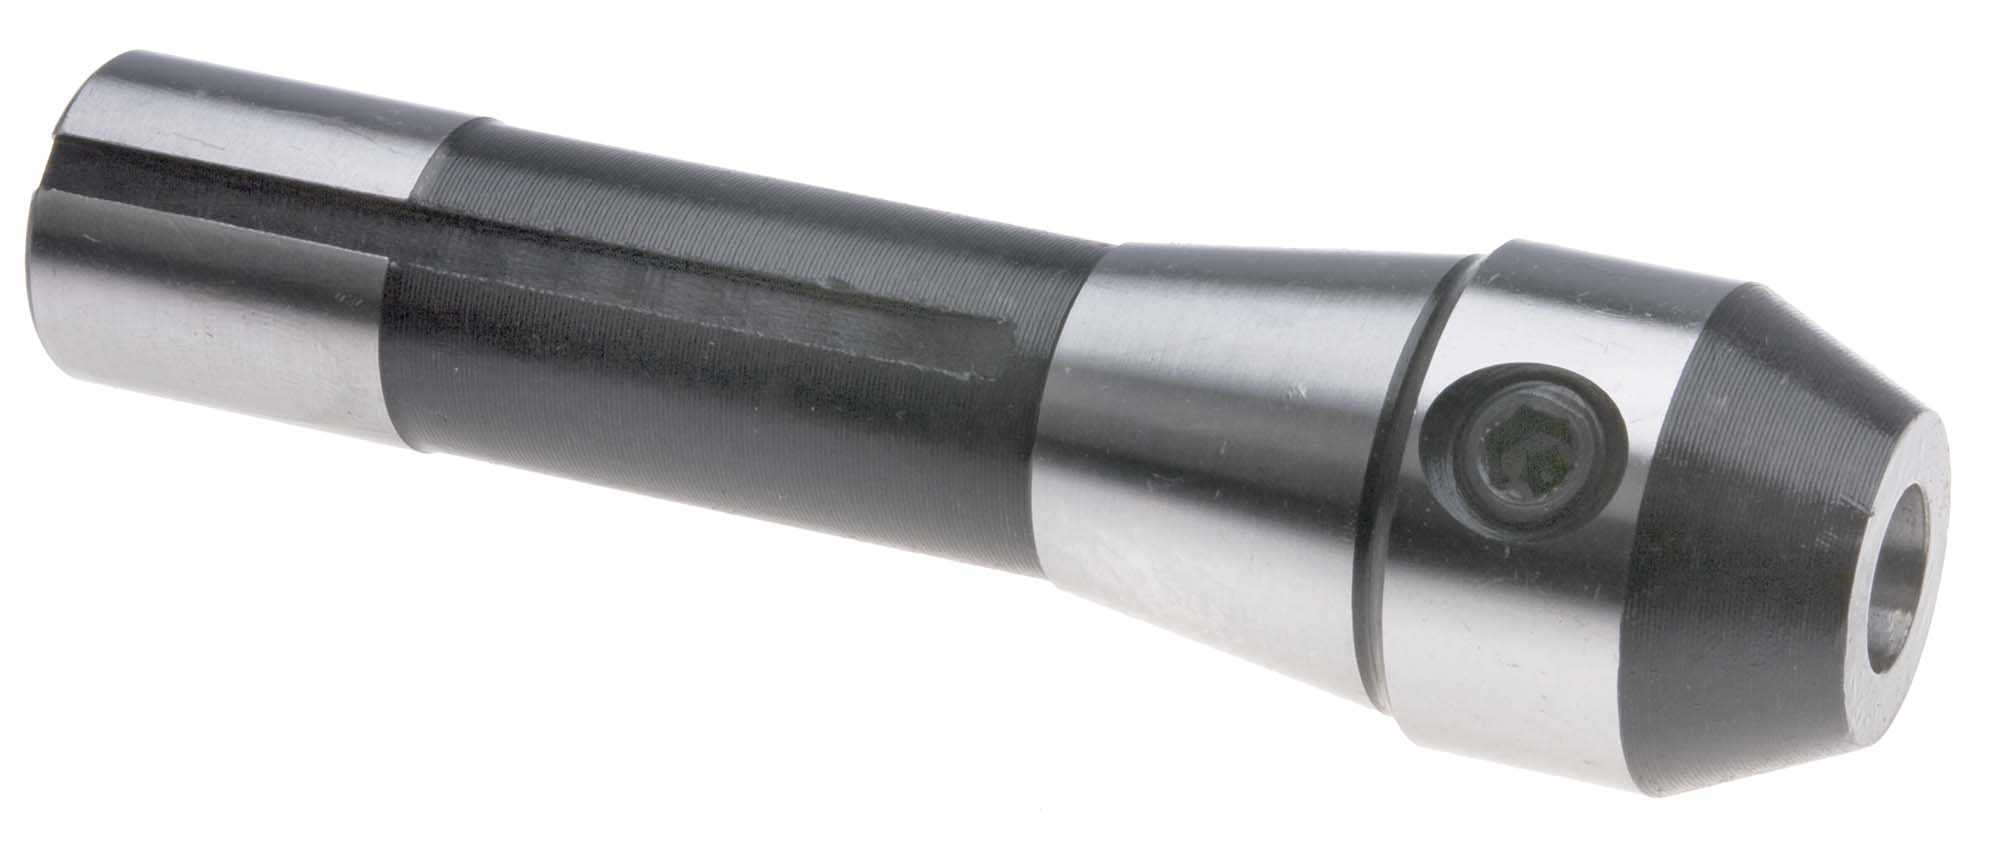 1-1/2" R8 End Mill Adapter